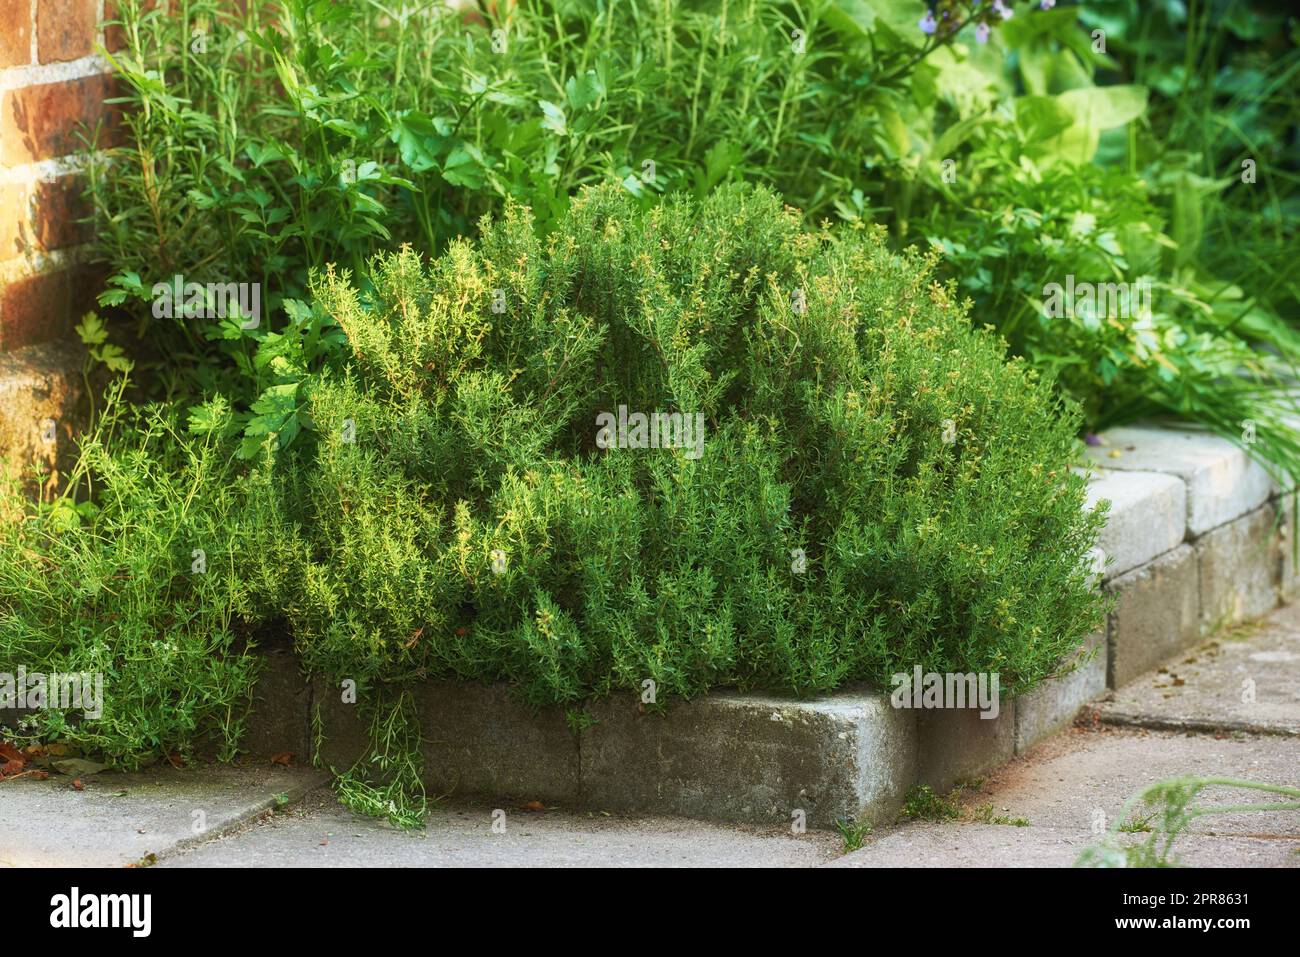 Small green herb garden growing in a backyard outside with little shrubs and bushes. Lush grass and herbal plants grow in a sustainable ecological garden with healthy fresh foliage during spring Stock Photo